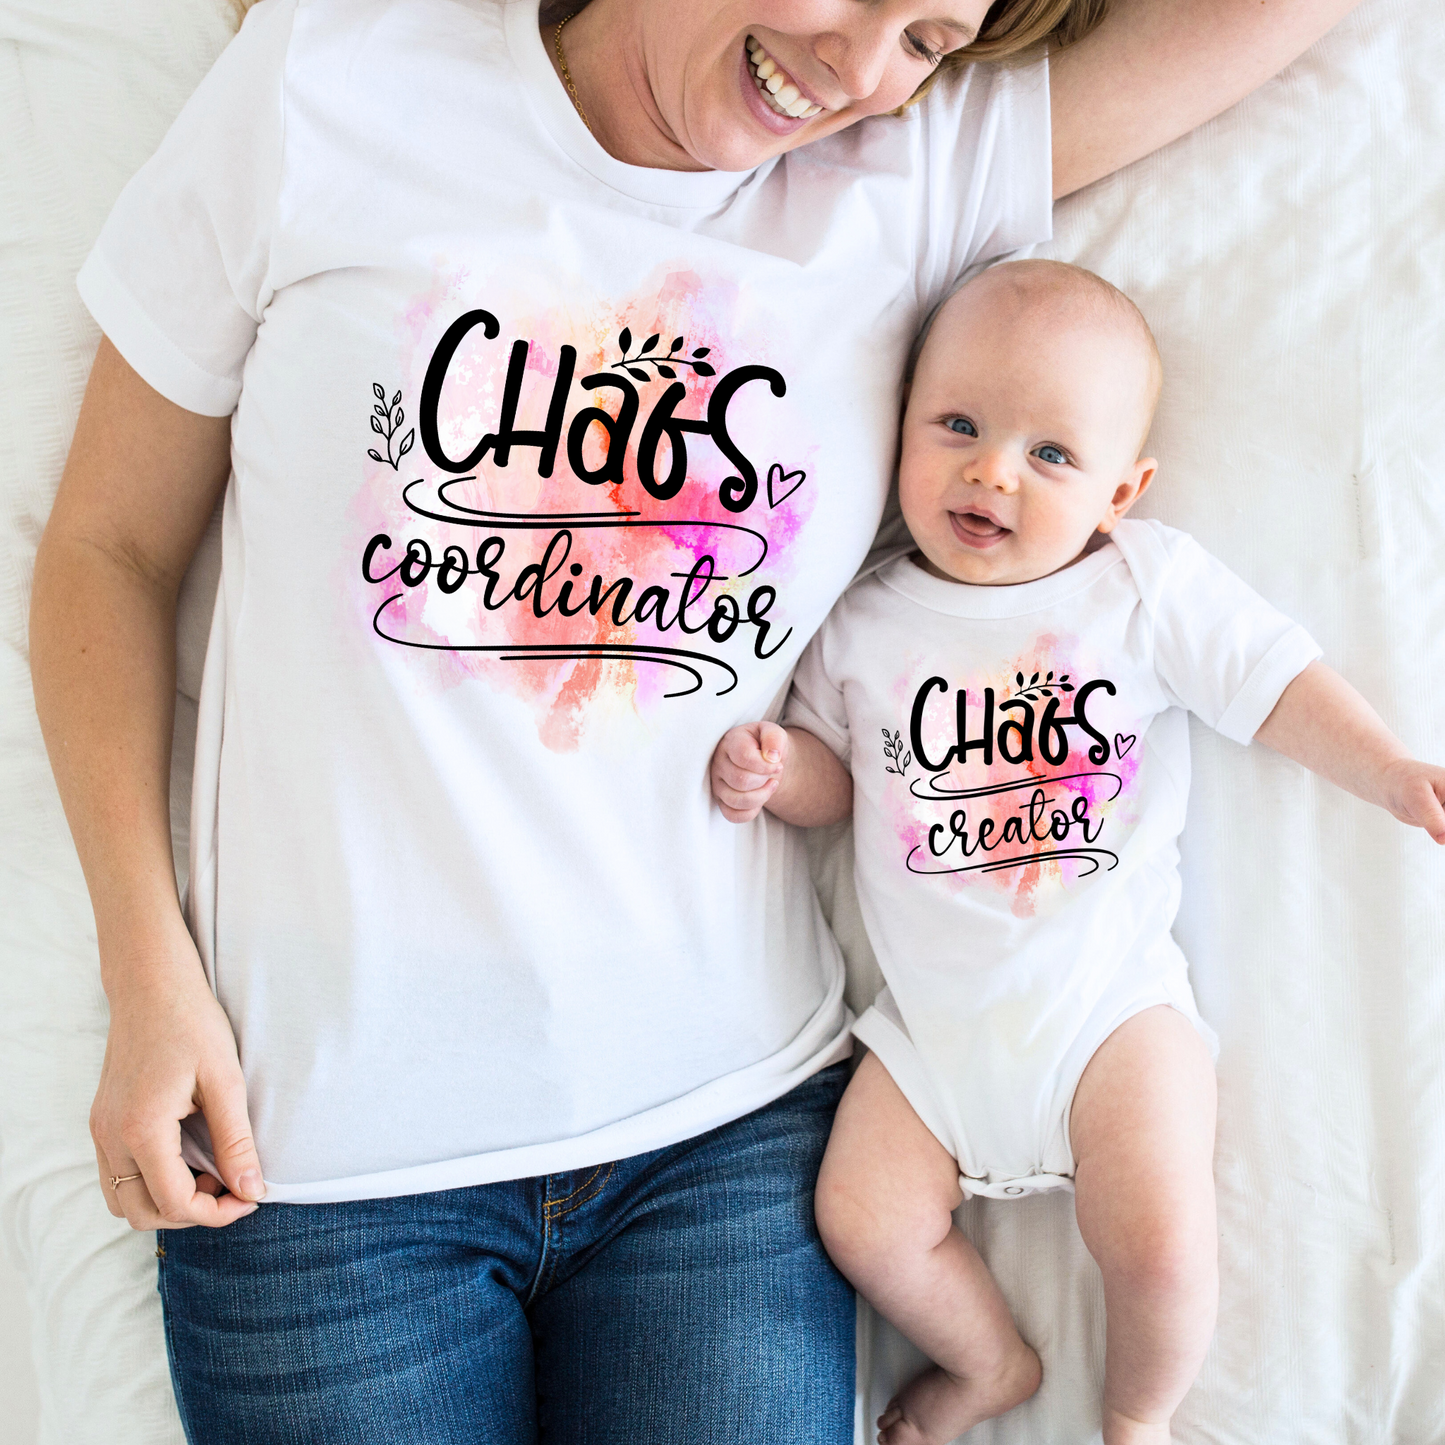 Chaos Coordinator & Creator - Mom and Baby Outfit